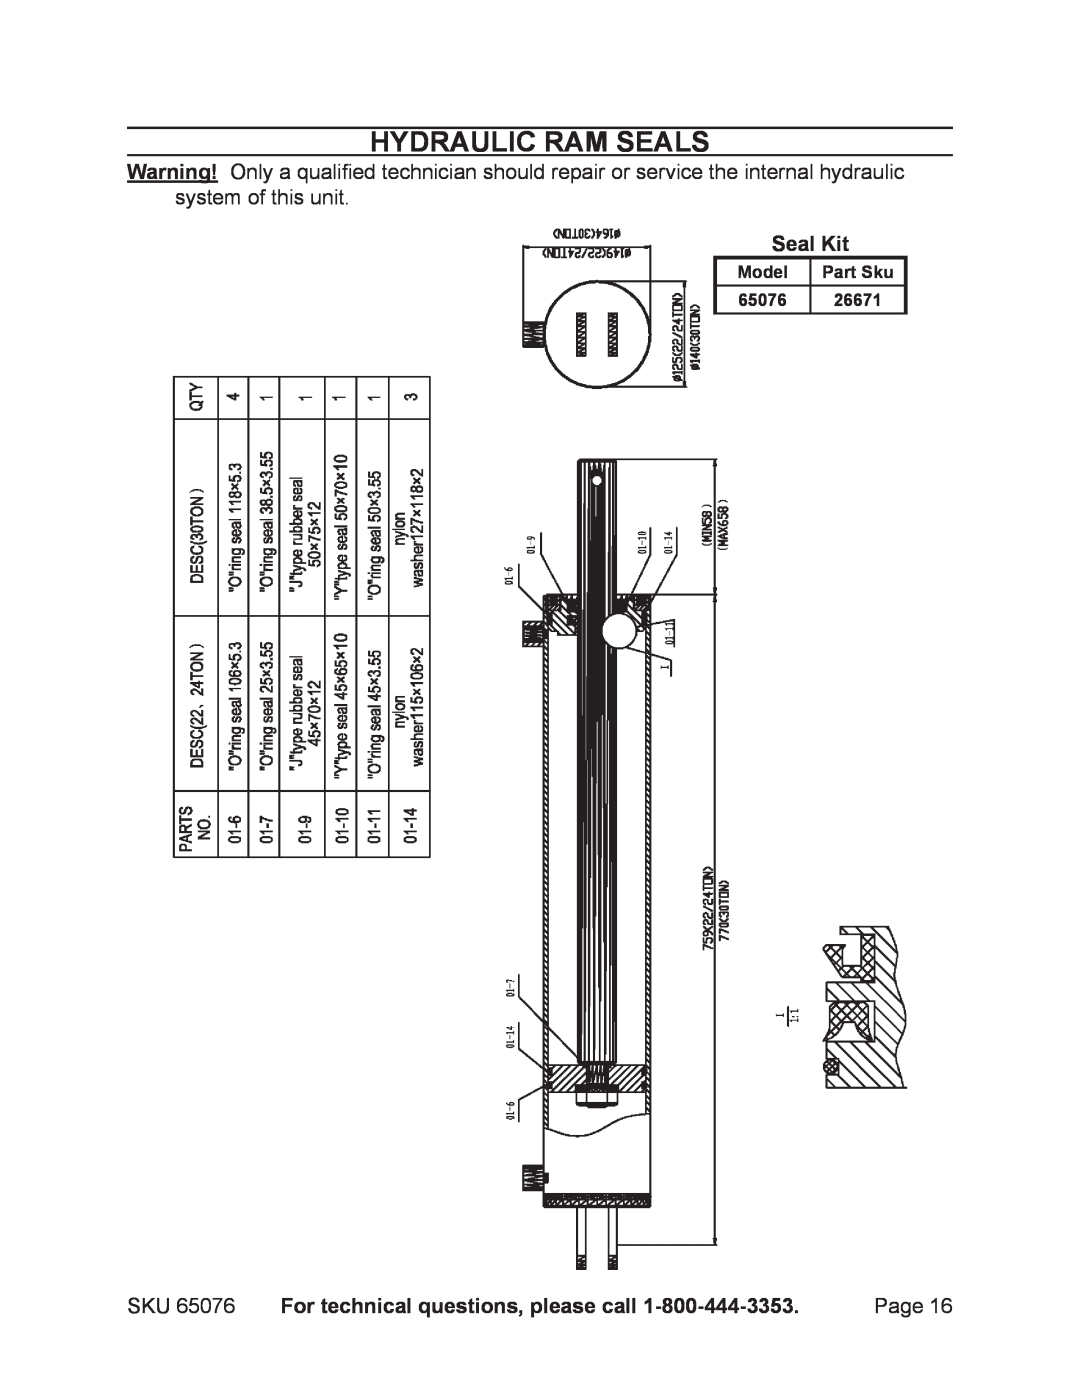 Harbor Freight Tools 65076 Hydraulic Ram Seals, Seal Kit, For technical questions, please call, Model, Part Sku, 26671 